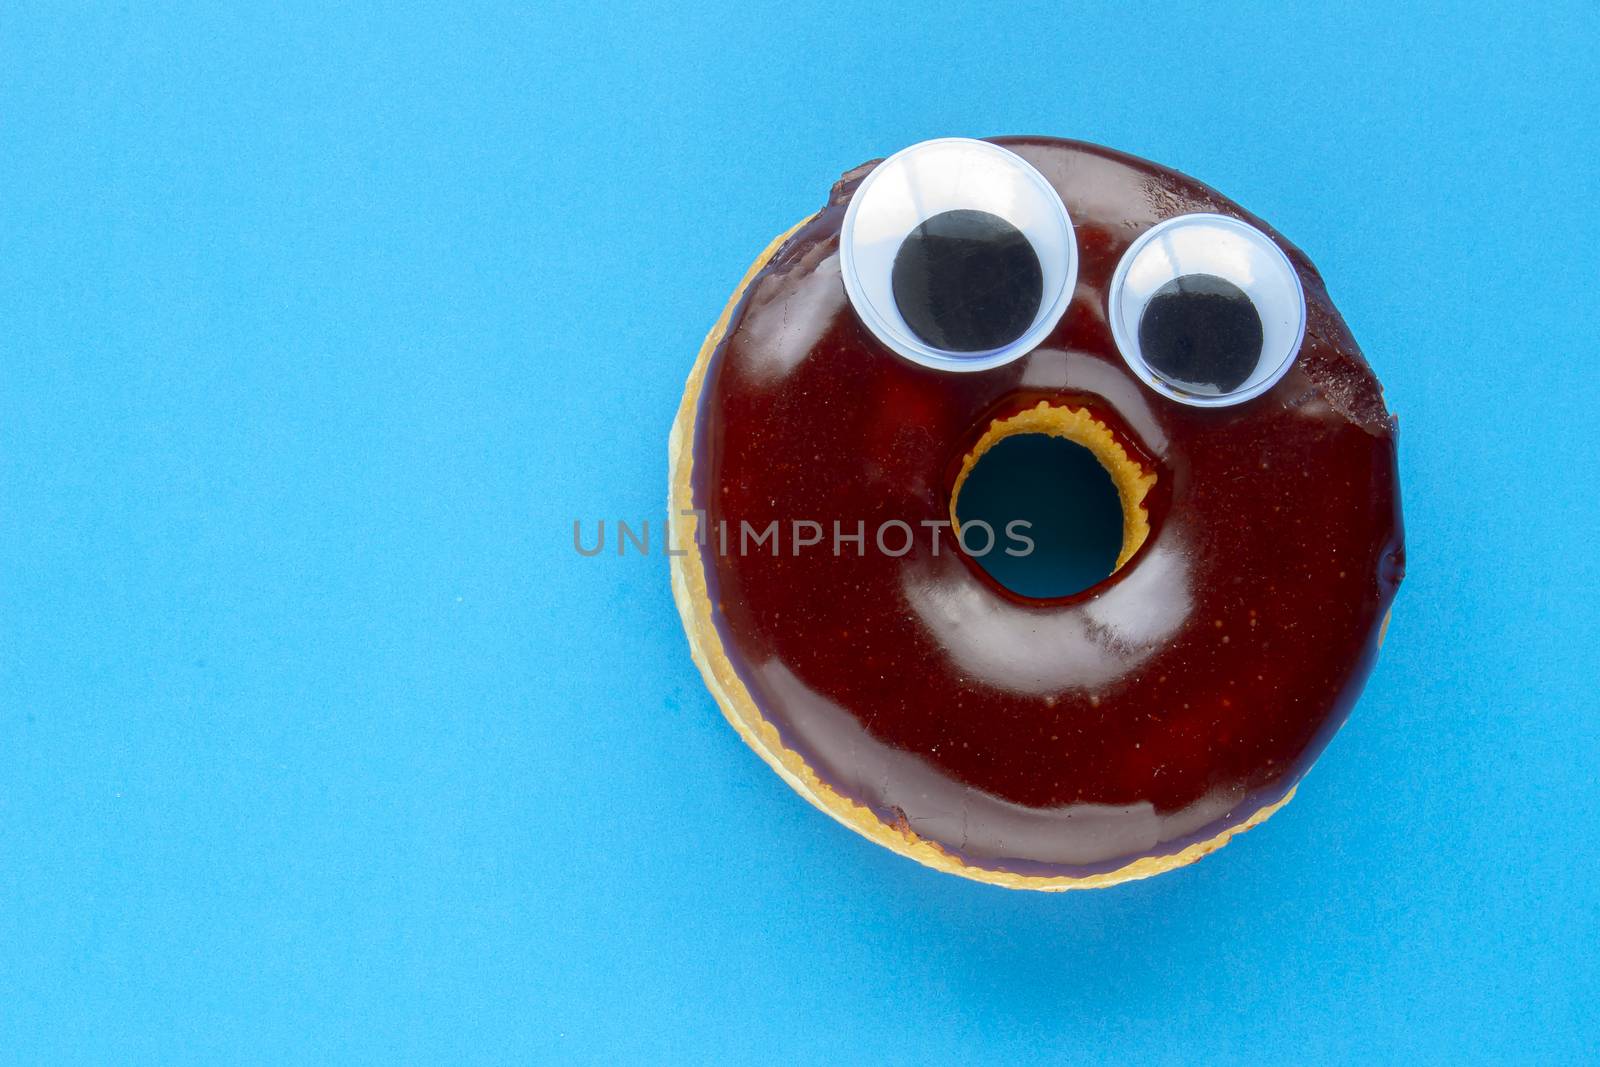 A Tim Hortons Chocolate Dip Donut with Black Wiggle Googly Eyeballs on a blue background by oasisamuel